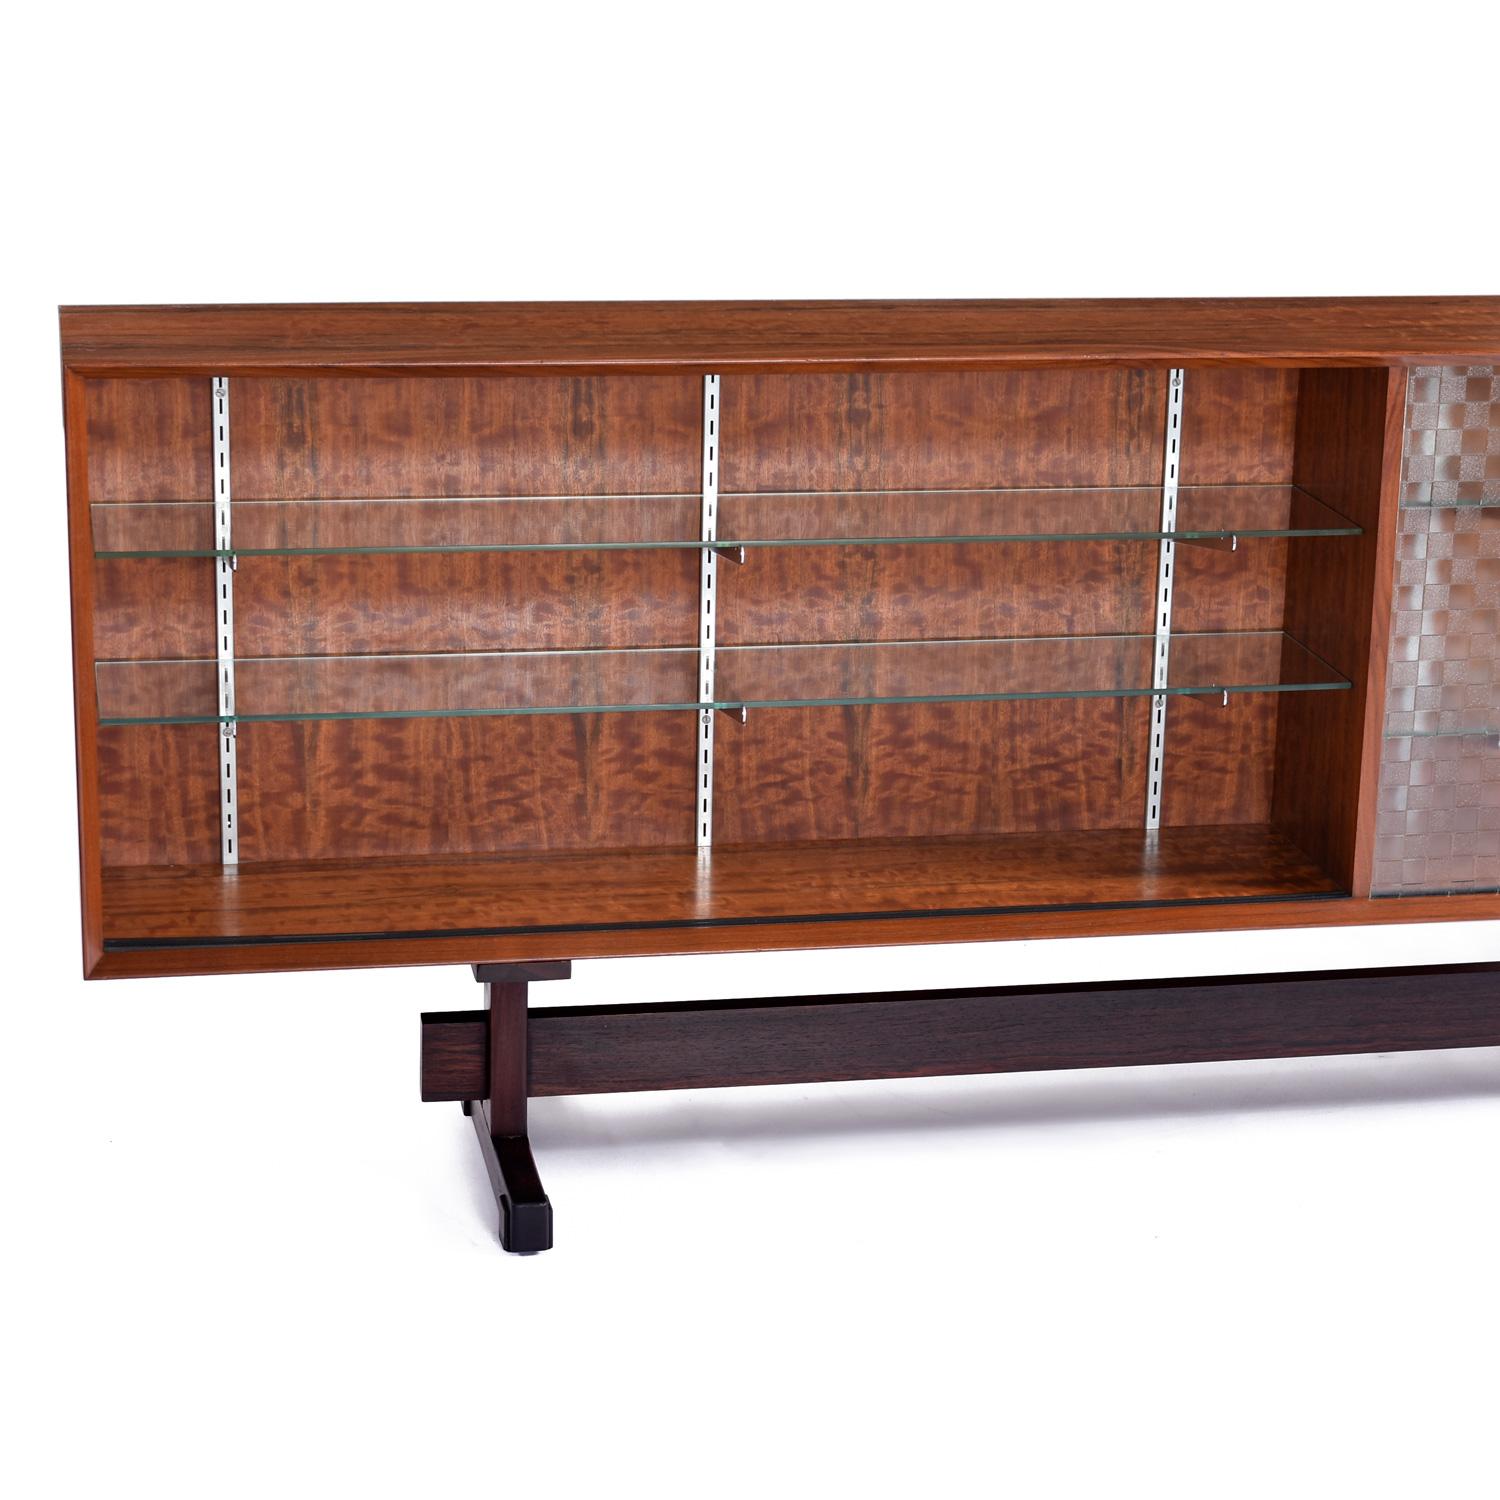 1950's Custom Made Mid-Century Modern Glass Door Mahogany Rosewood Credenza For Sale 2